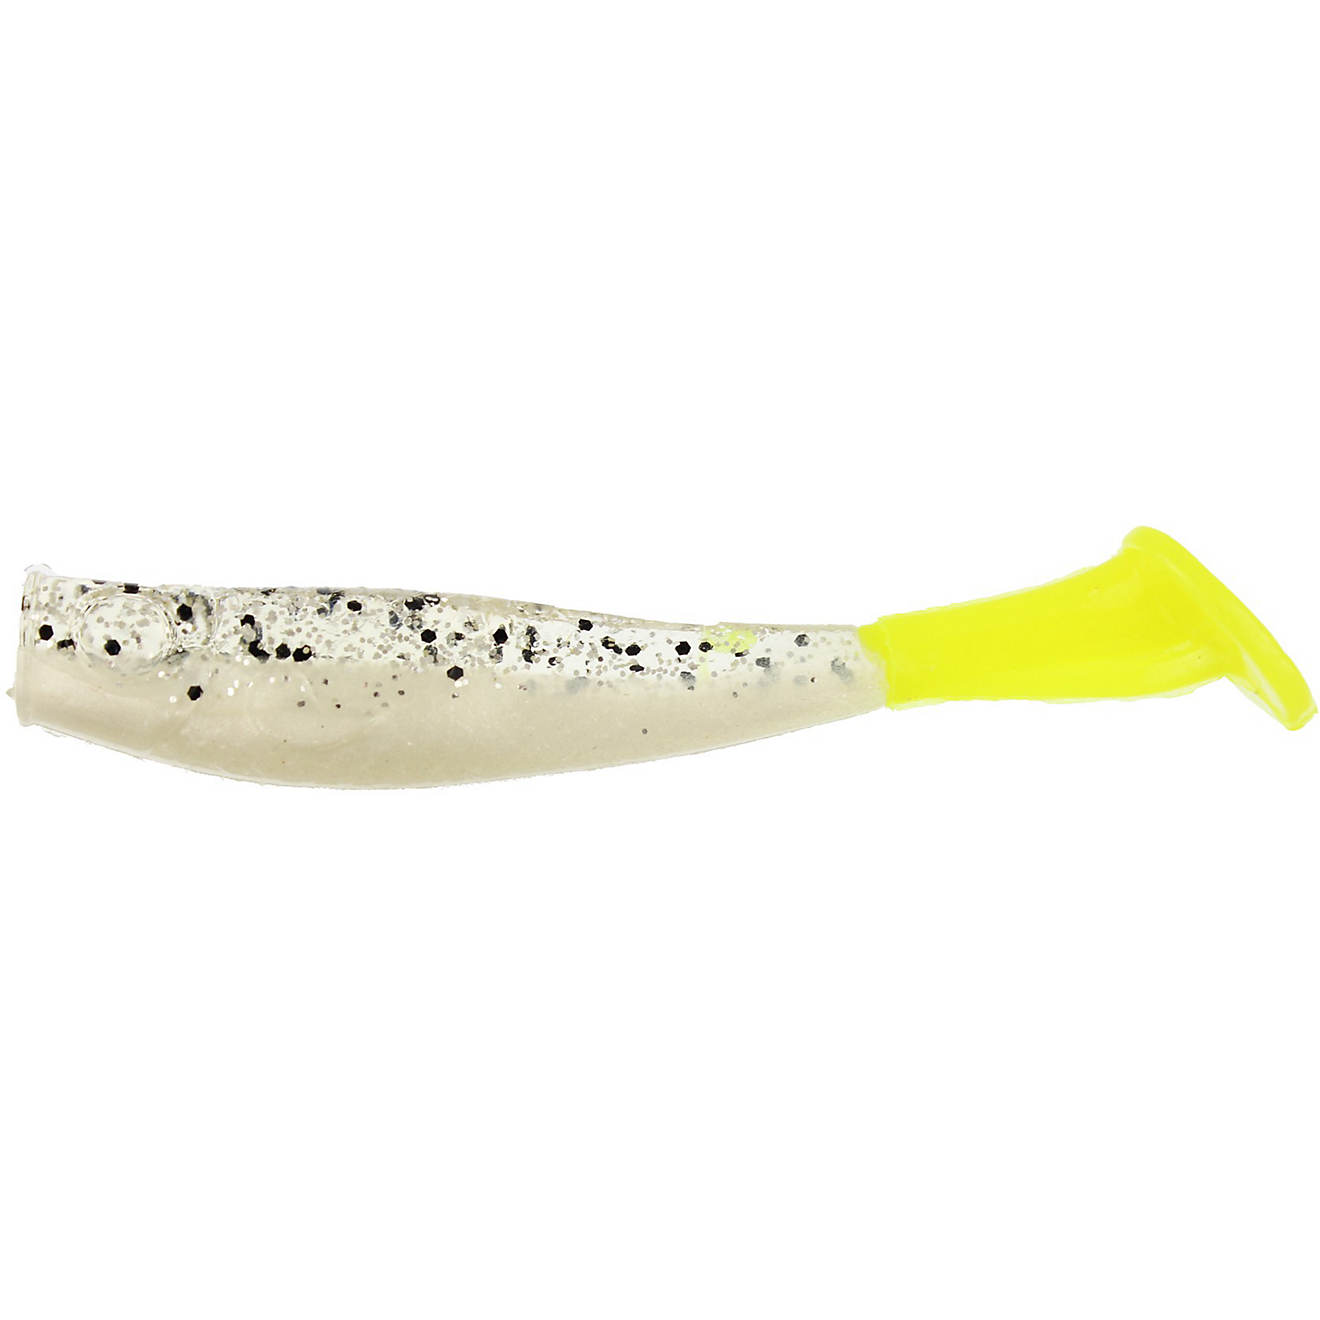 MirrOlure Marsh Minnow Jr. 3 in Paddle Tail Baits 6-Pack                                                                         - view number 1